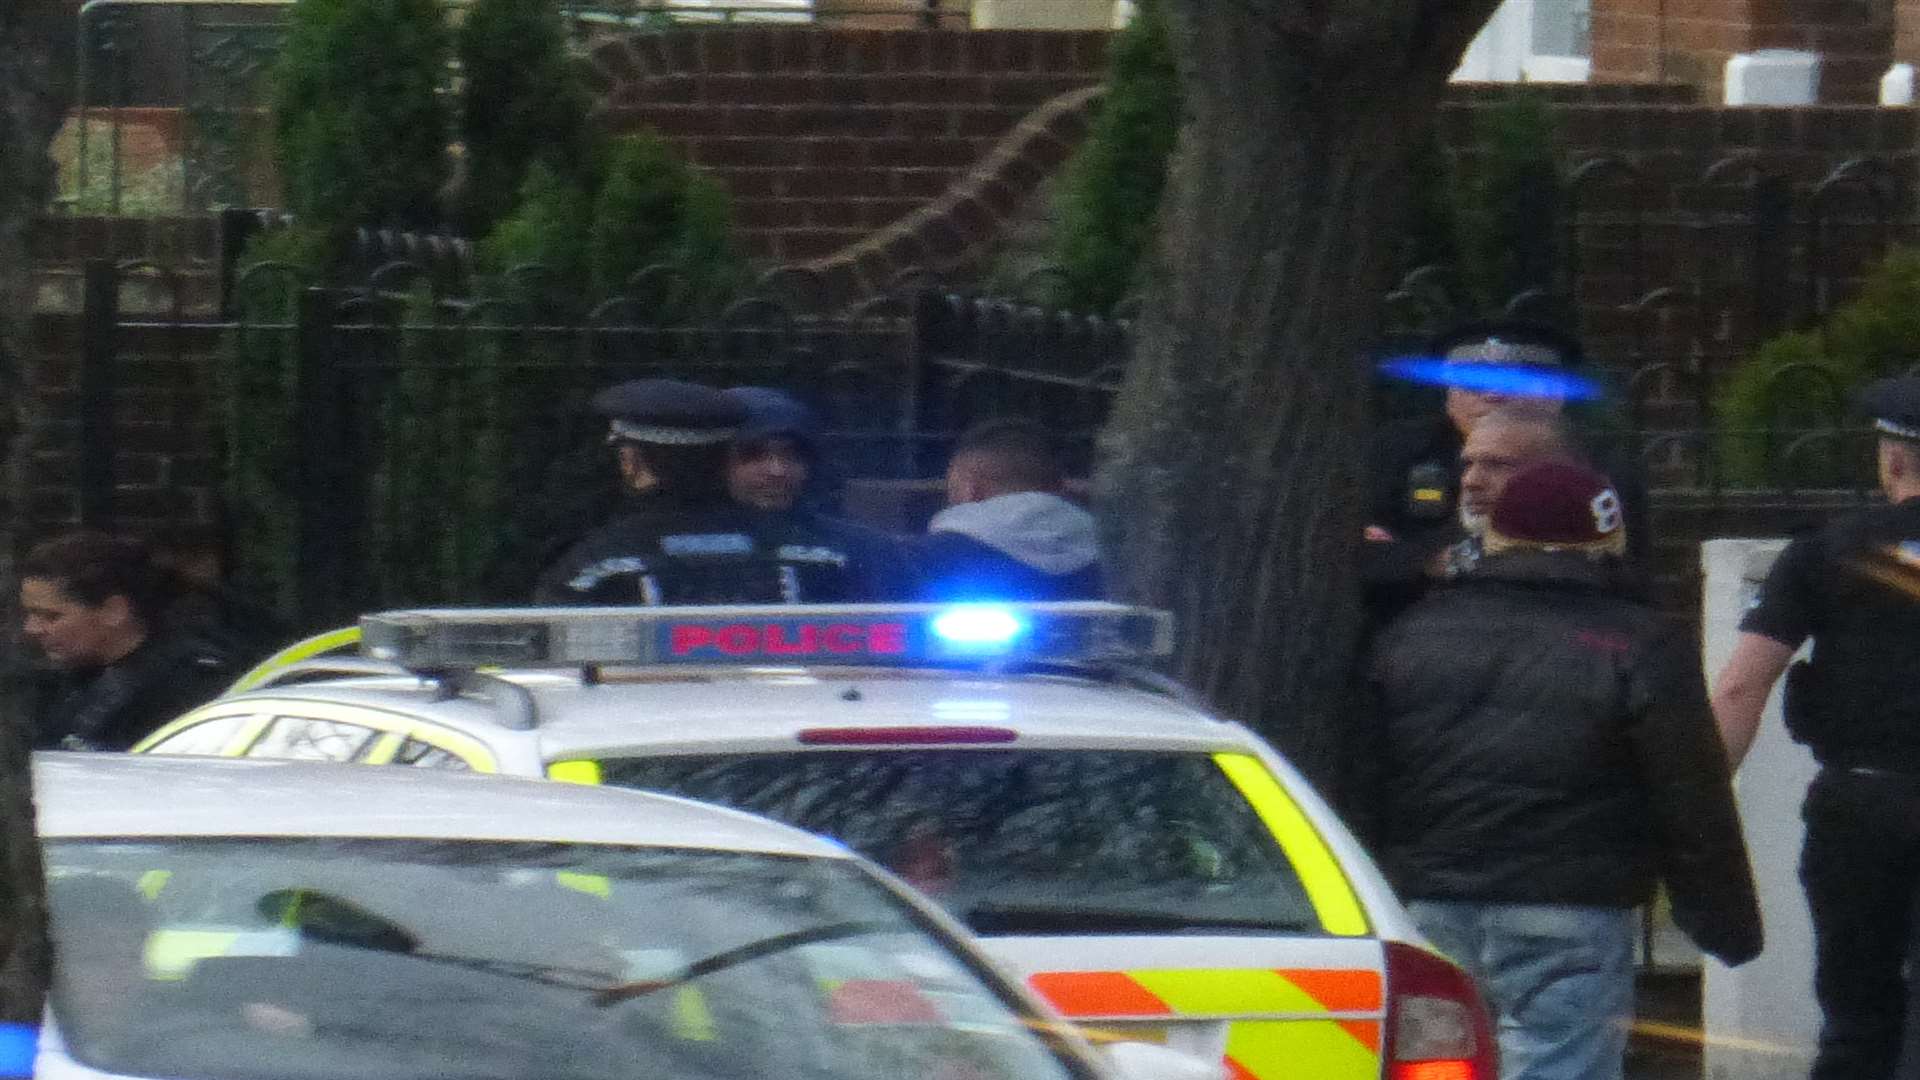 Police at the scene of a disturbance in New Road, Chatham